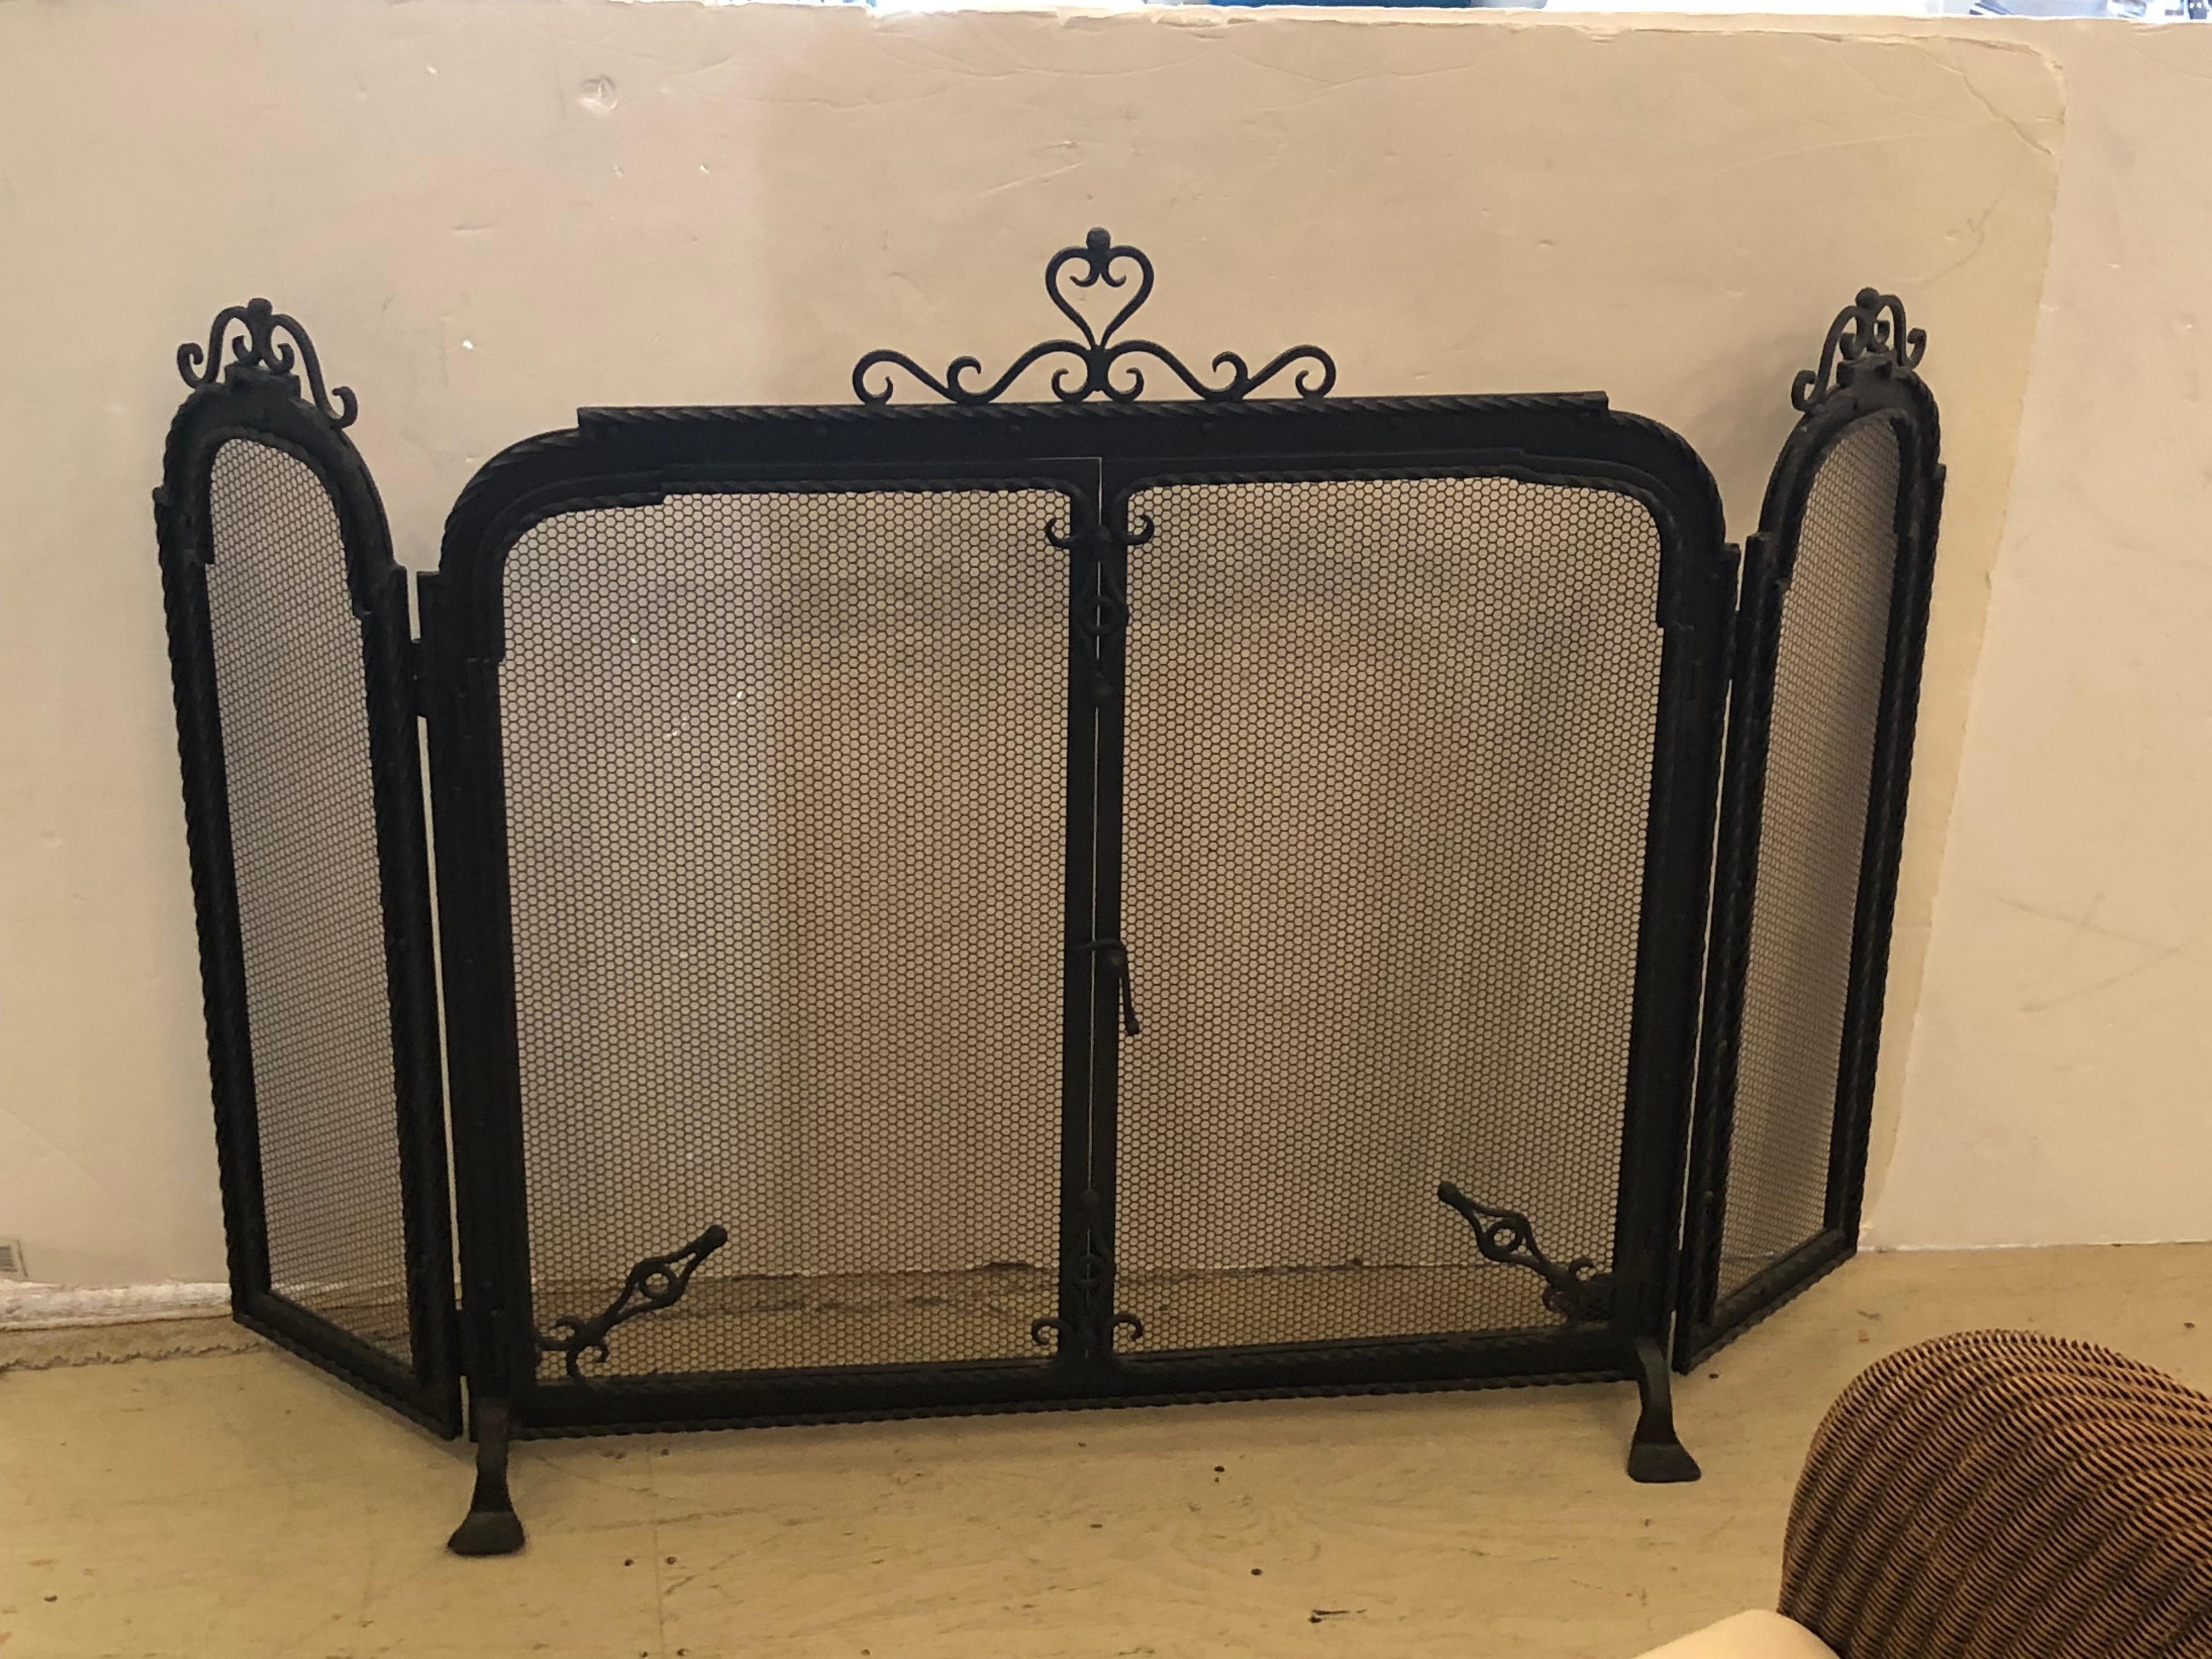 1940's spectacular heavy mesh screen and black wrought iron  3 piece fireplace screen with doors that open in the center section.
Center is 34